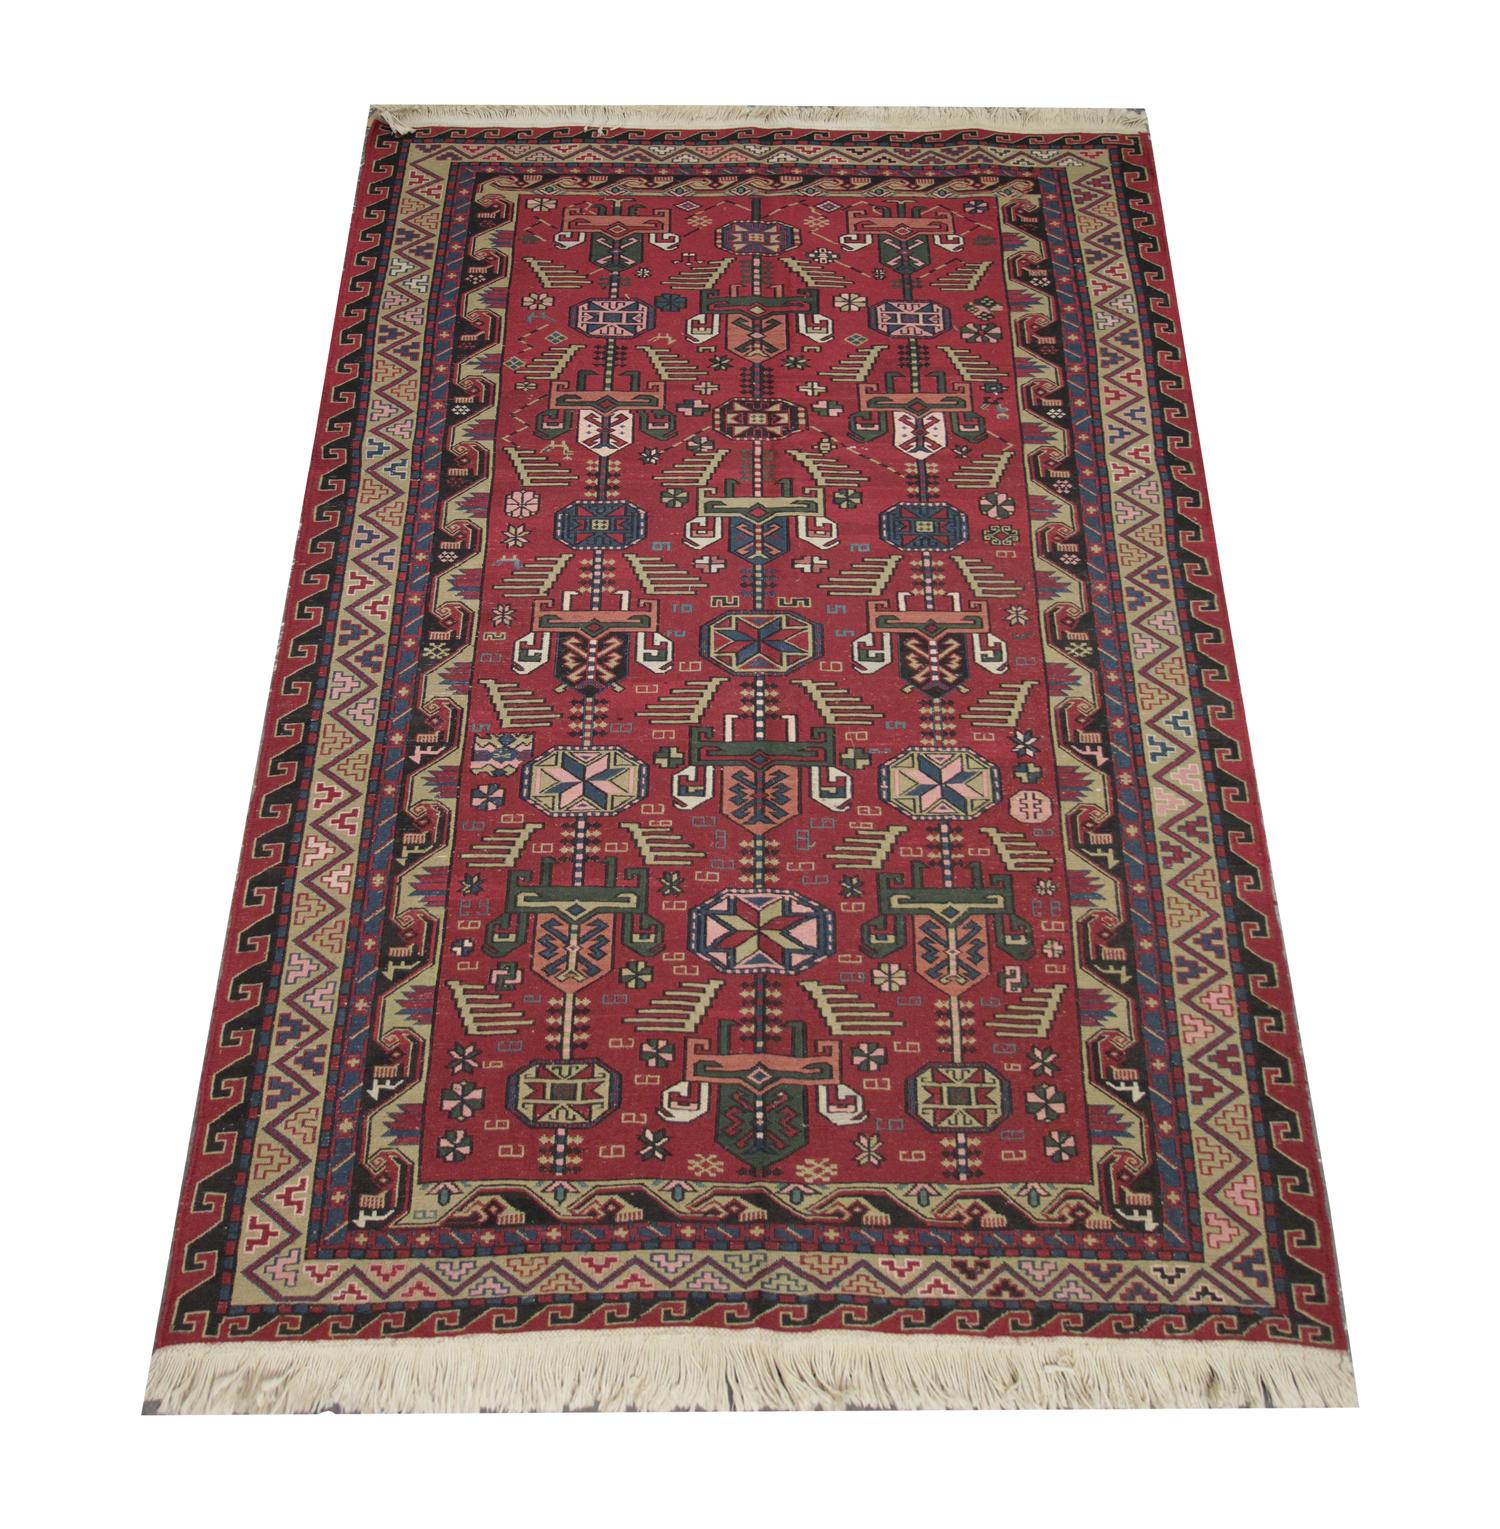 This fine wool tribal Soumak rug is rich in both colour and design. Woven with a rich red background with green, beige, cream and blue accent colours that make up the tribal motifs. A bold repeating pattern border then frames this. This